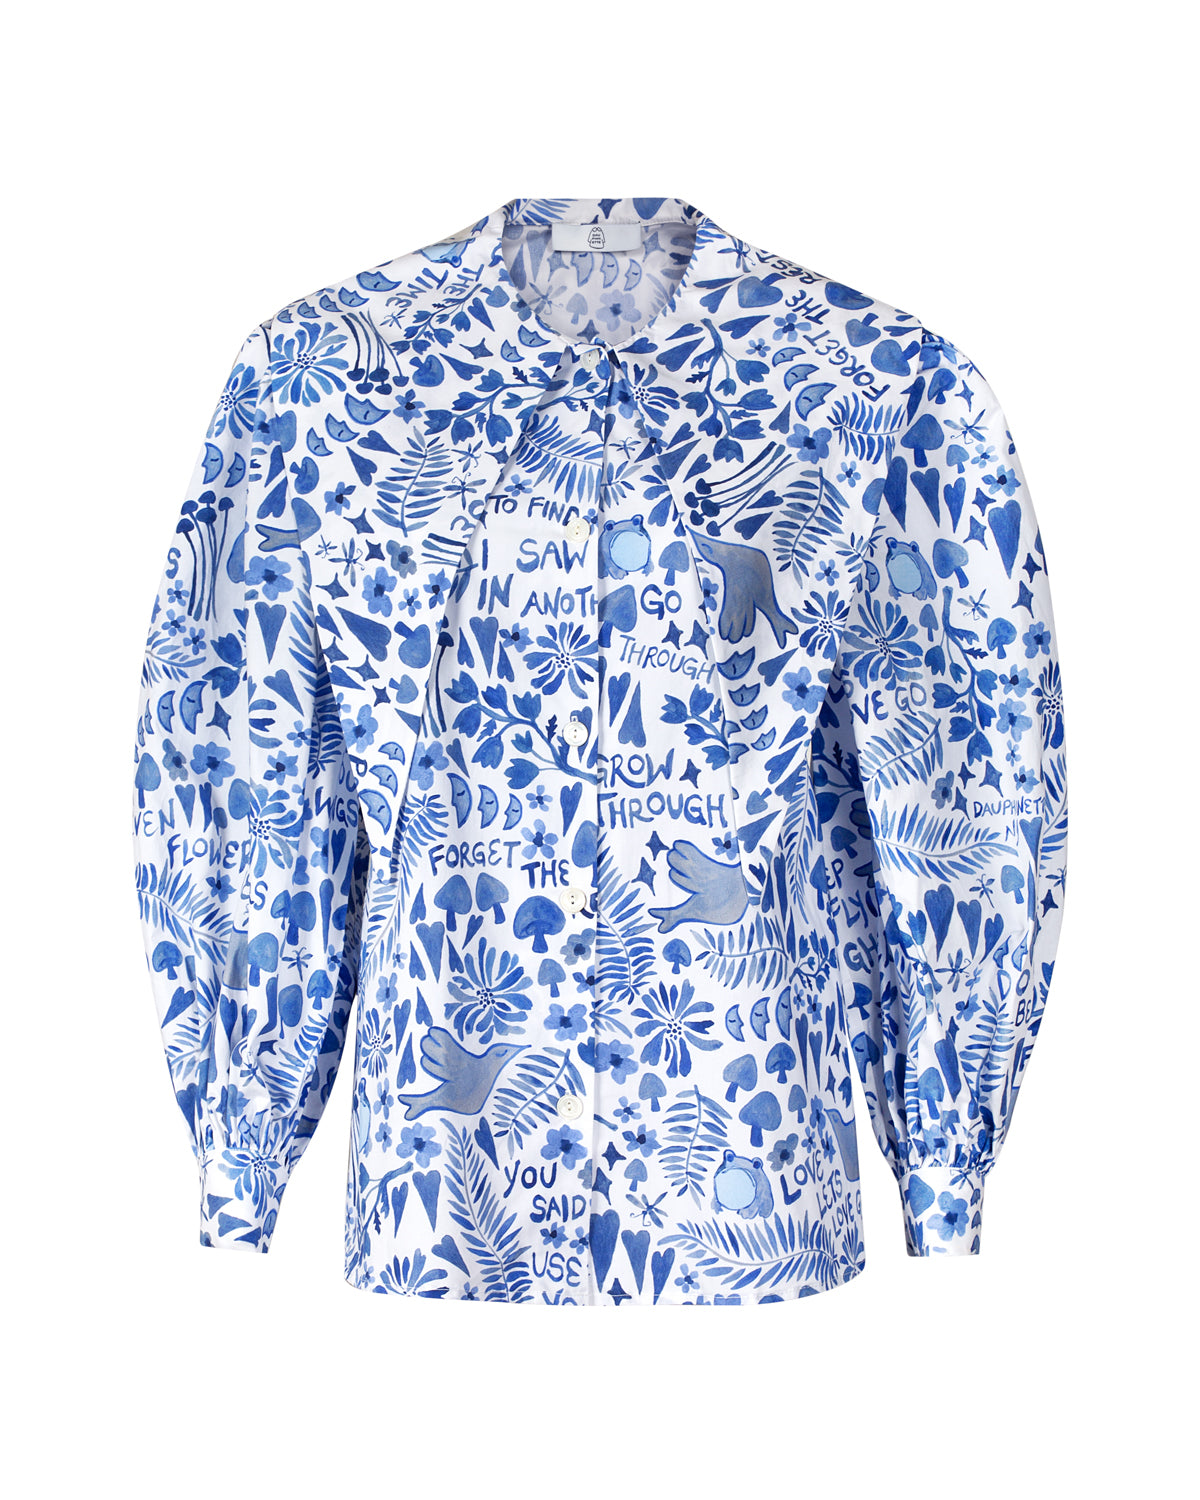 Chinoiserie-inspired, Lazy Boy Floral printed cotton button-down with exaggerated sleeves and collar